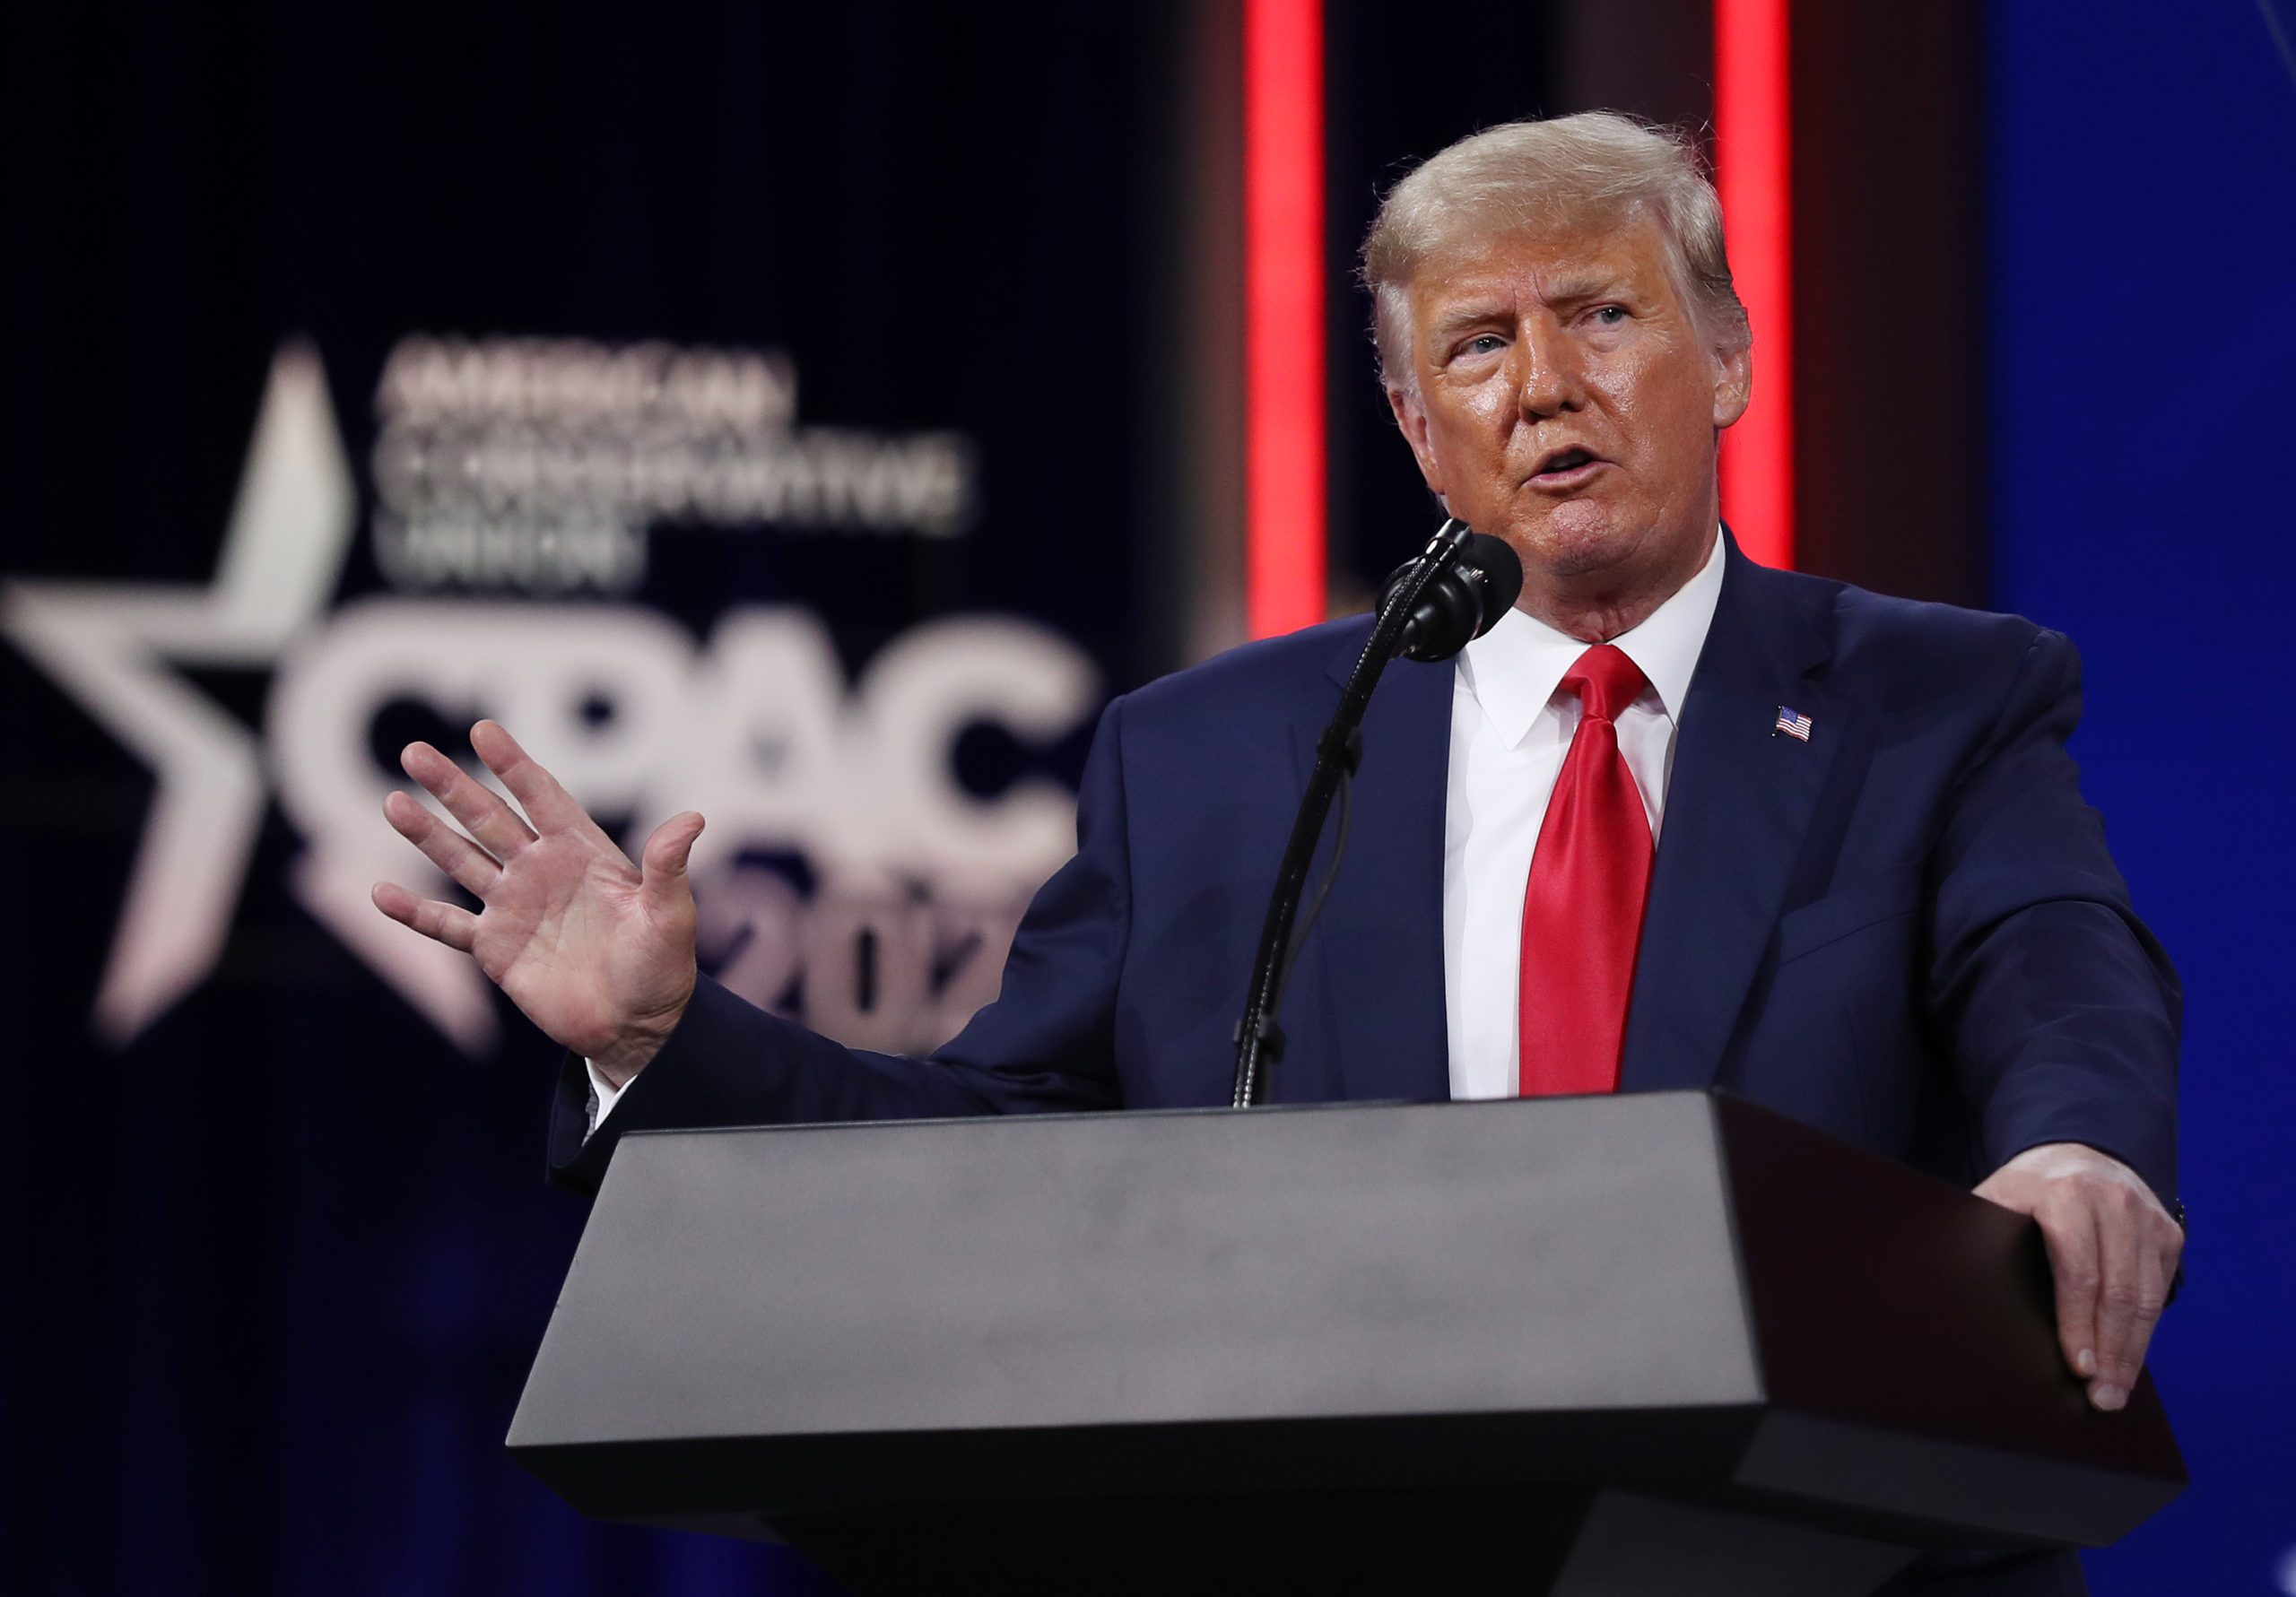 Former President Donald Trump speaks at the Conservative Political Action Conference in February in Orlando, Florida. (Joe Raedle/Getty Images)